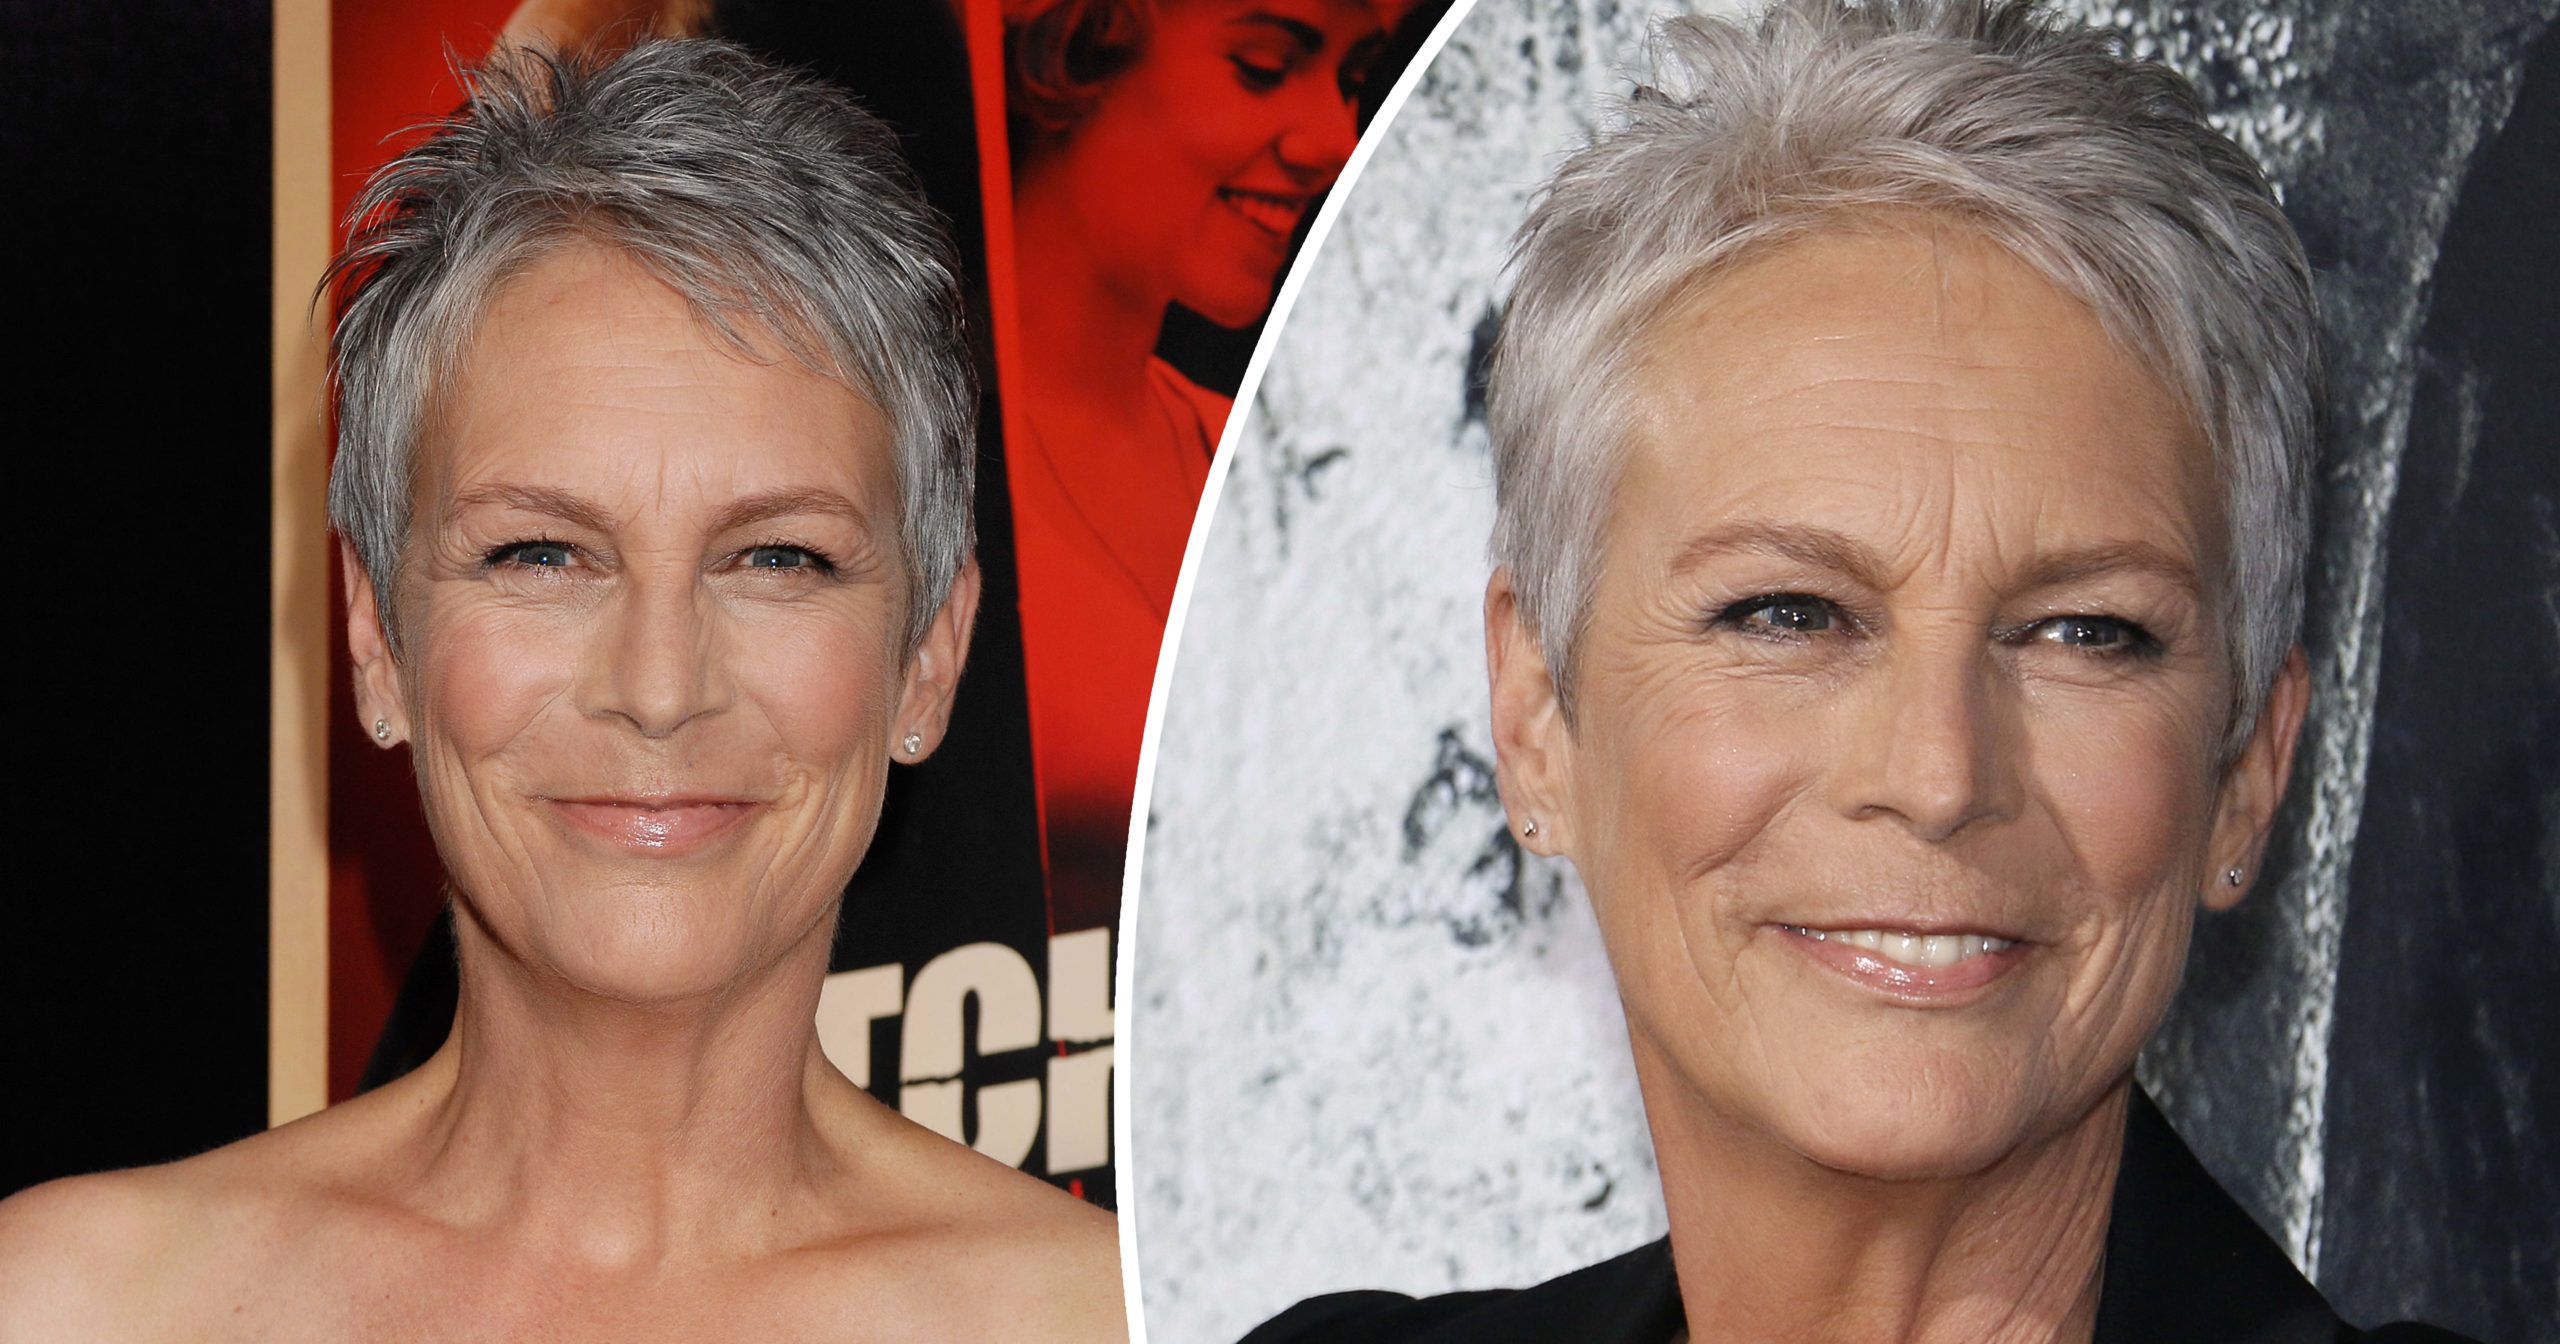 Jamie Lee Curtis reveals plastic surgery mistakes, says it was ...